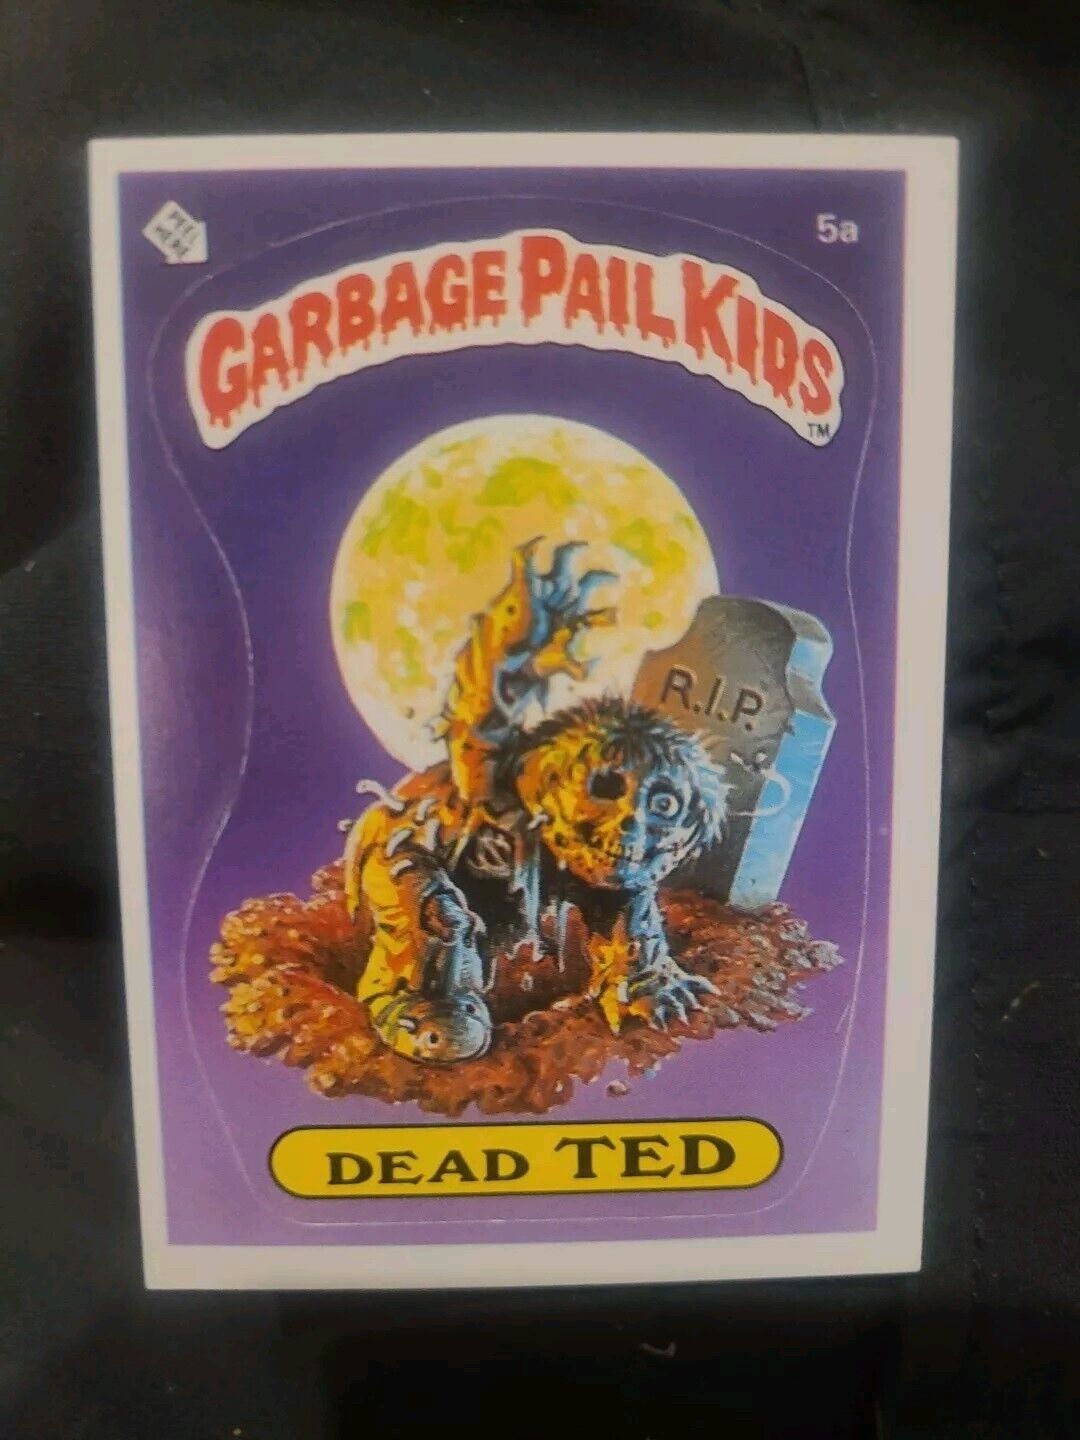 GLOSSY SET BREAK 1985 Garbage Pail Kids OS1 - 5a Dead Ted Checklist EXMT